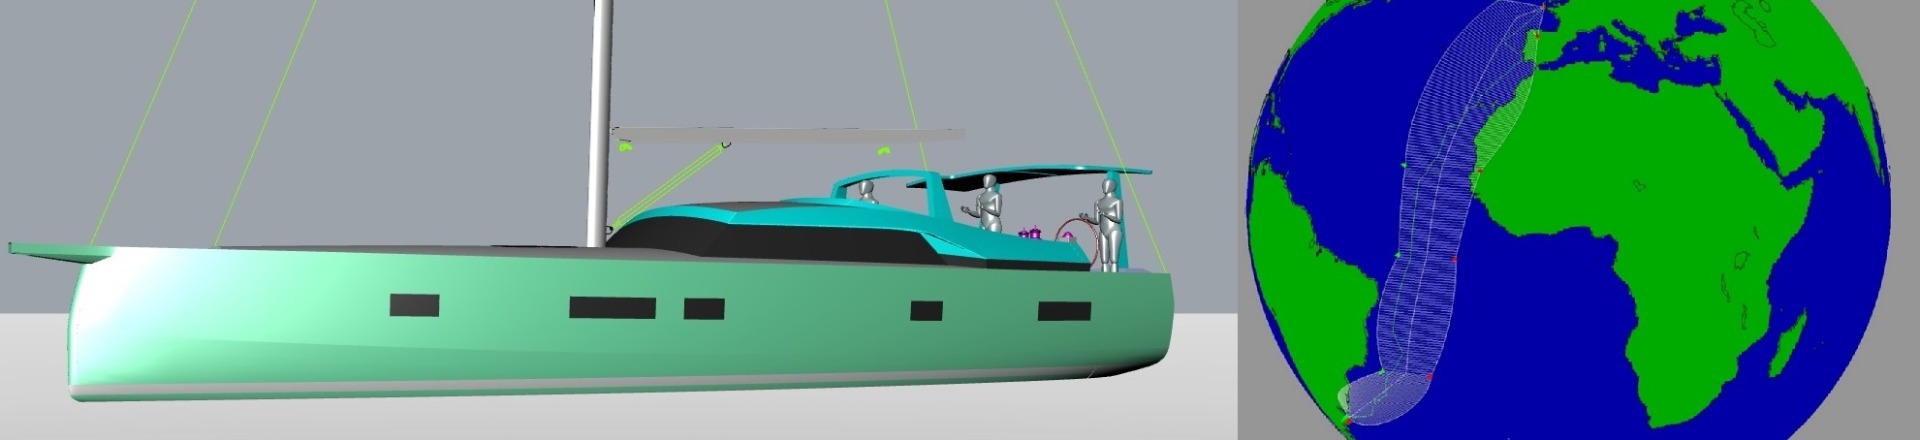 Composite image of OC marine hybrid electric drive blue water cruising design for a Swiss couple to circumnavigate . The graphic is output from a weather routing tool used as part of the design process.  This yacht has a lifting keel and twin rudders to achieve a shallow minimum draft.